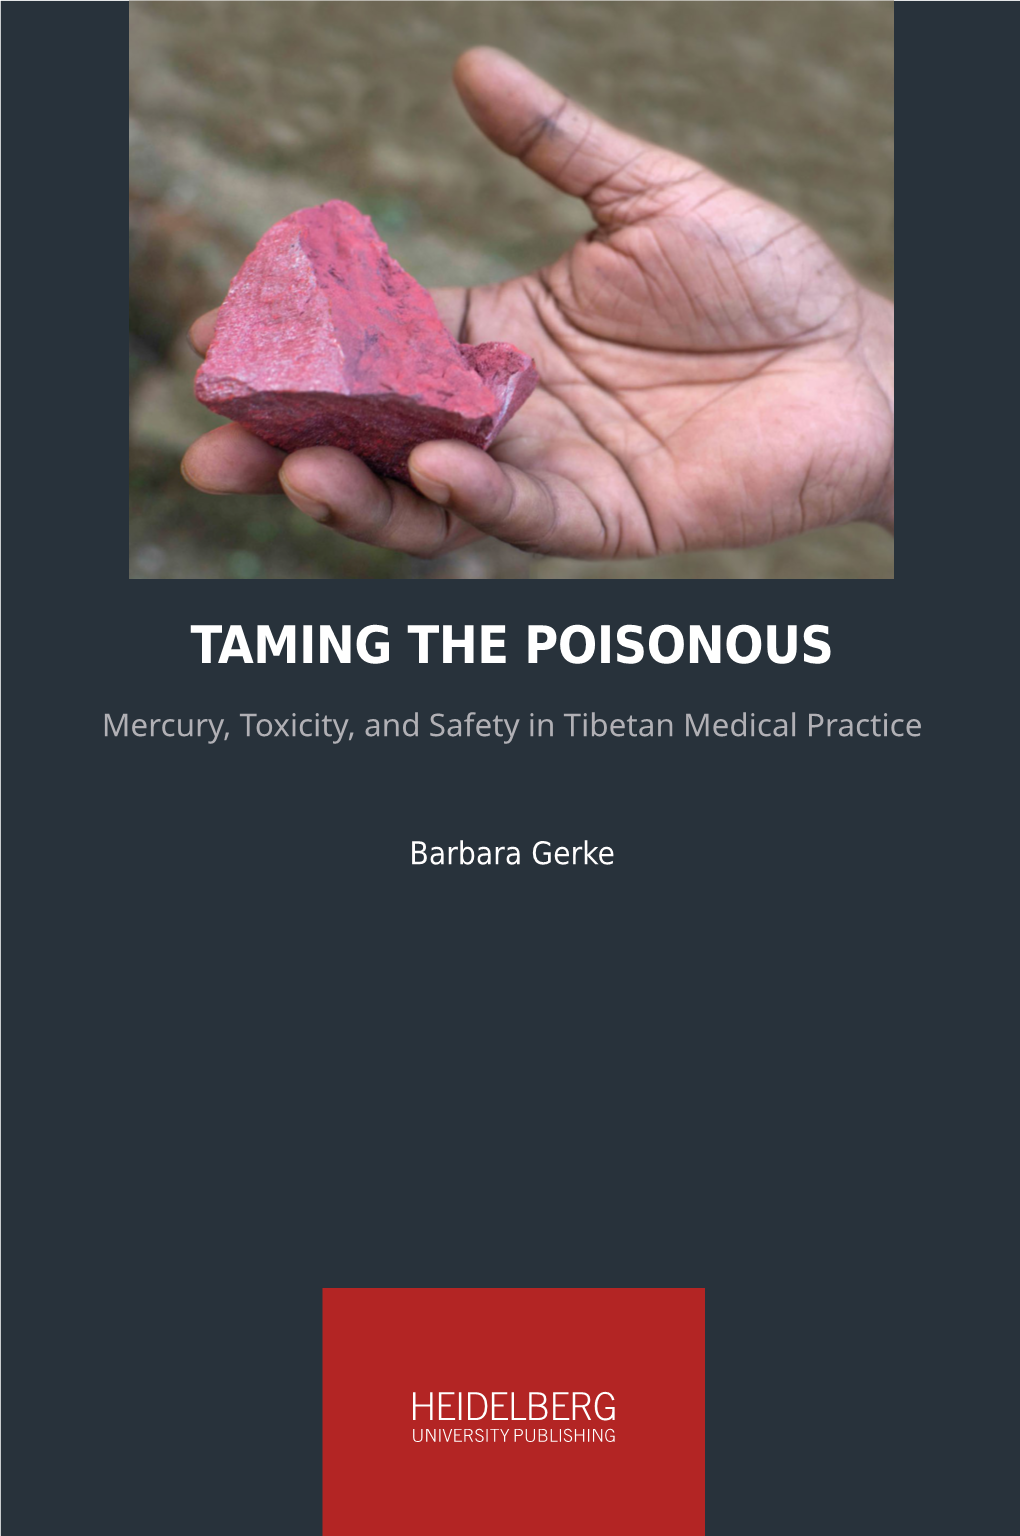 Mercury, Toxicity, and Safety in Tibetan Metical Practice